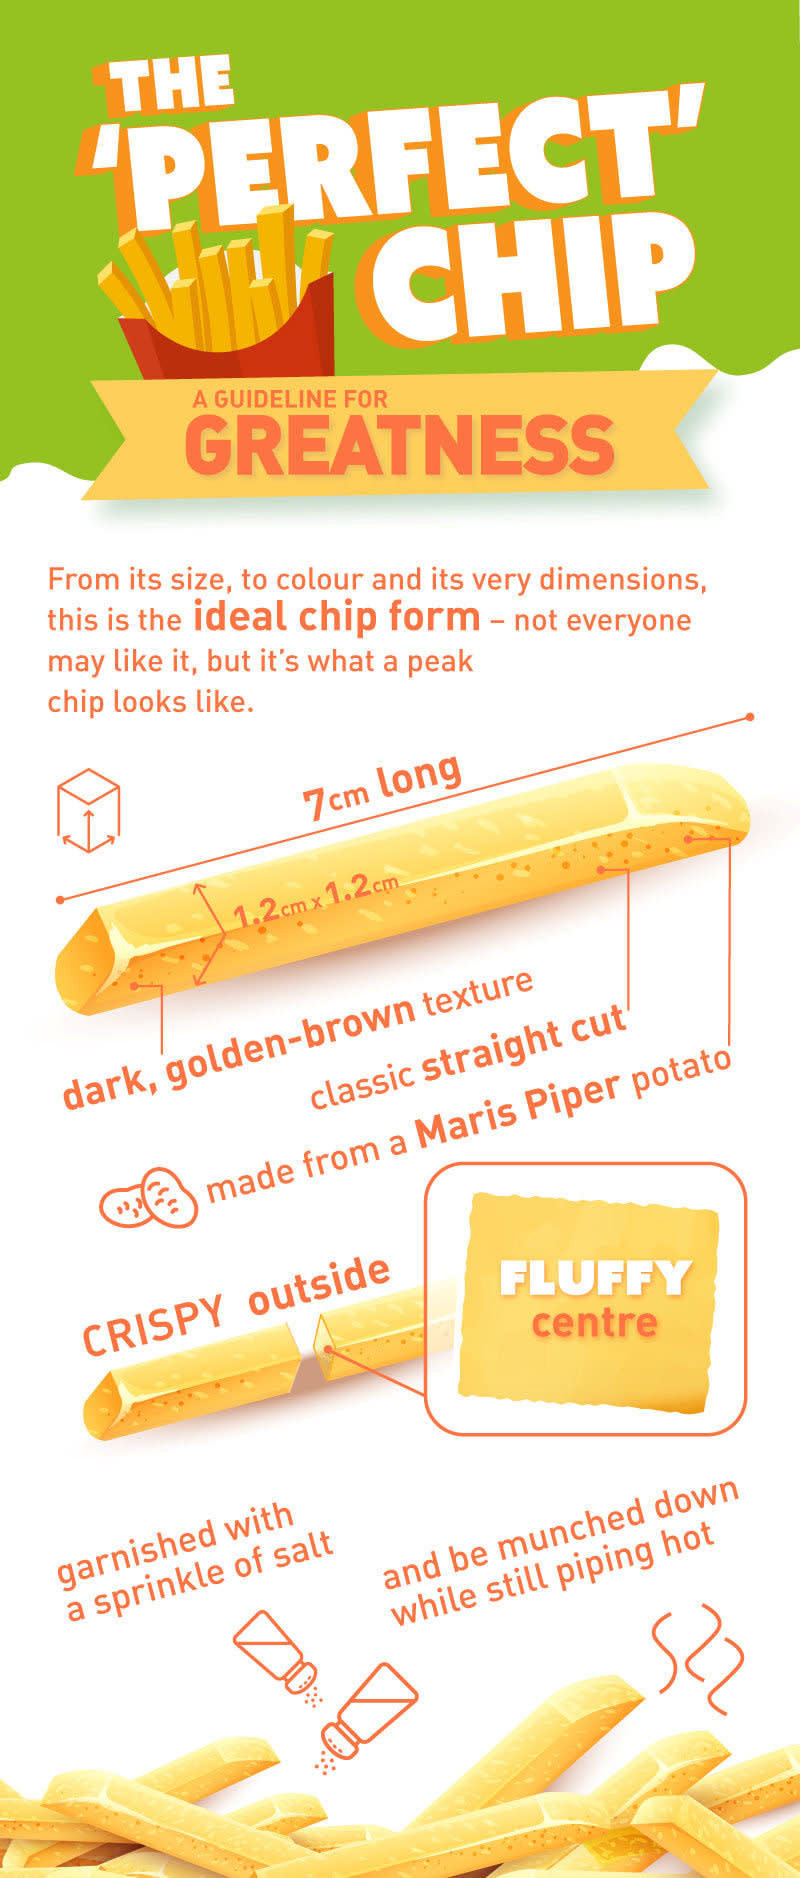 According to a survey of 2,000 adults by the Food Advisory Board, the perfect chip should be precisely 7cm long. [Photo: SWNS]